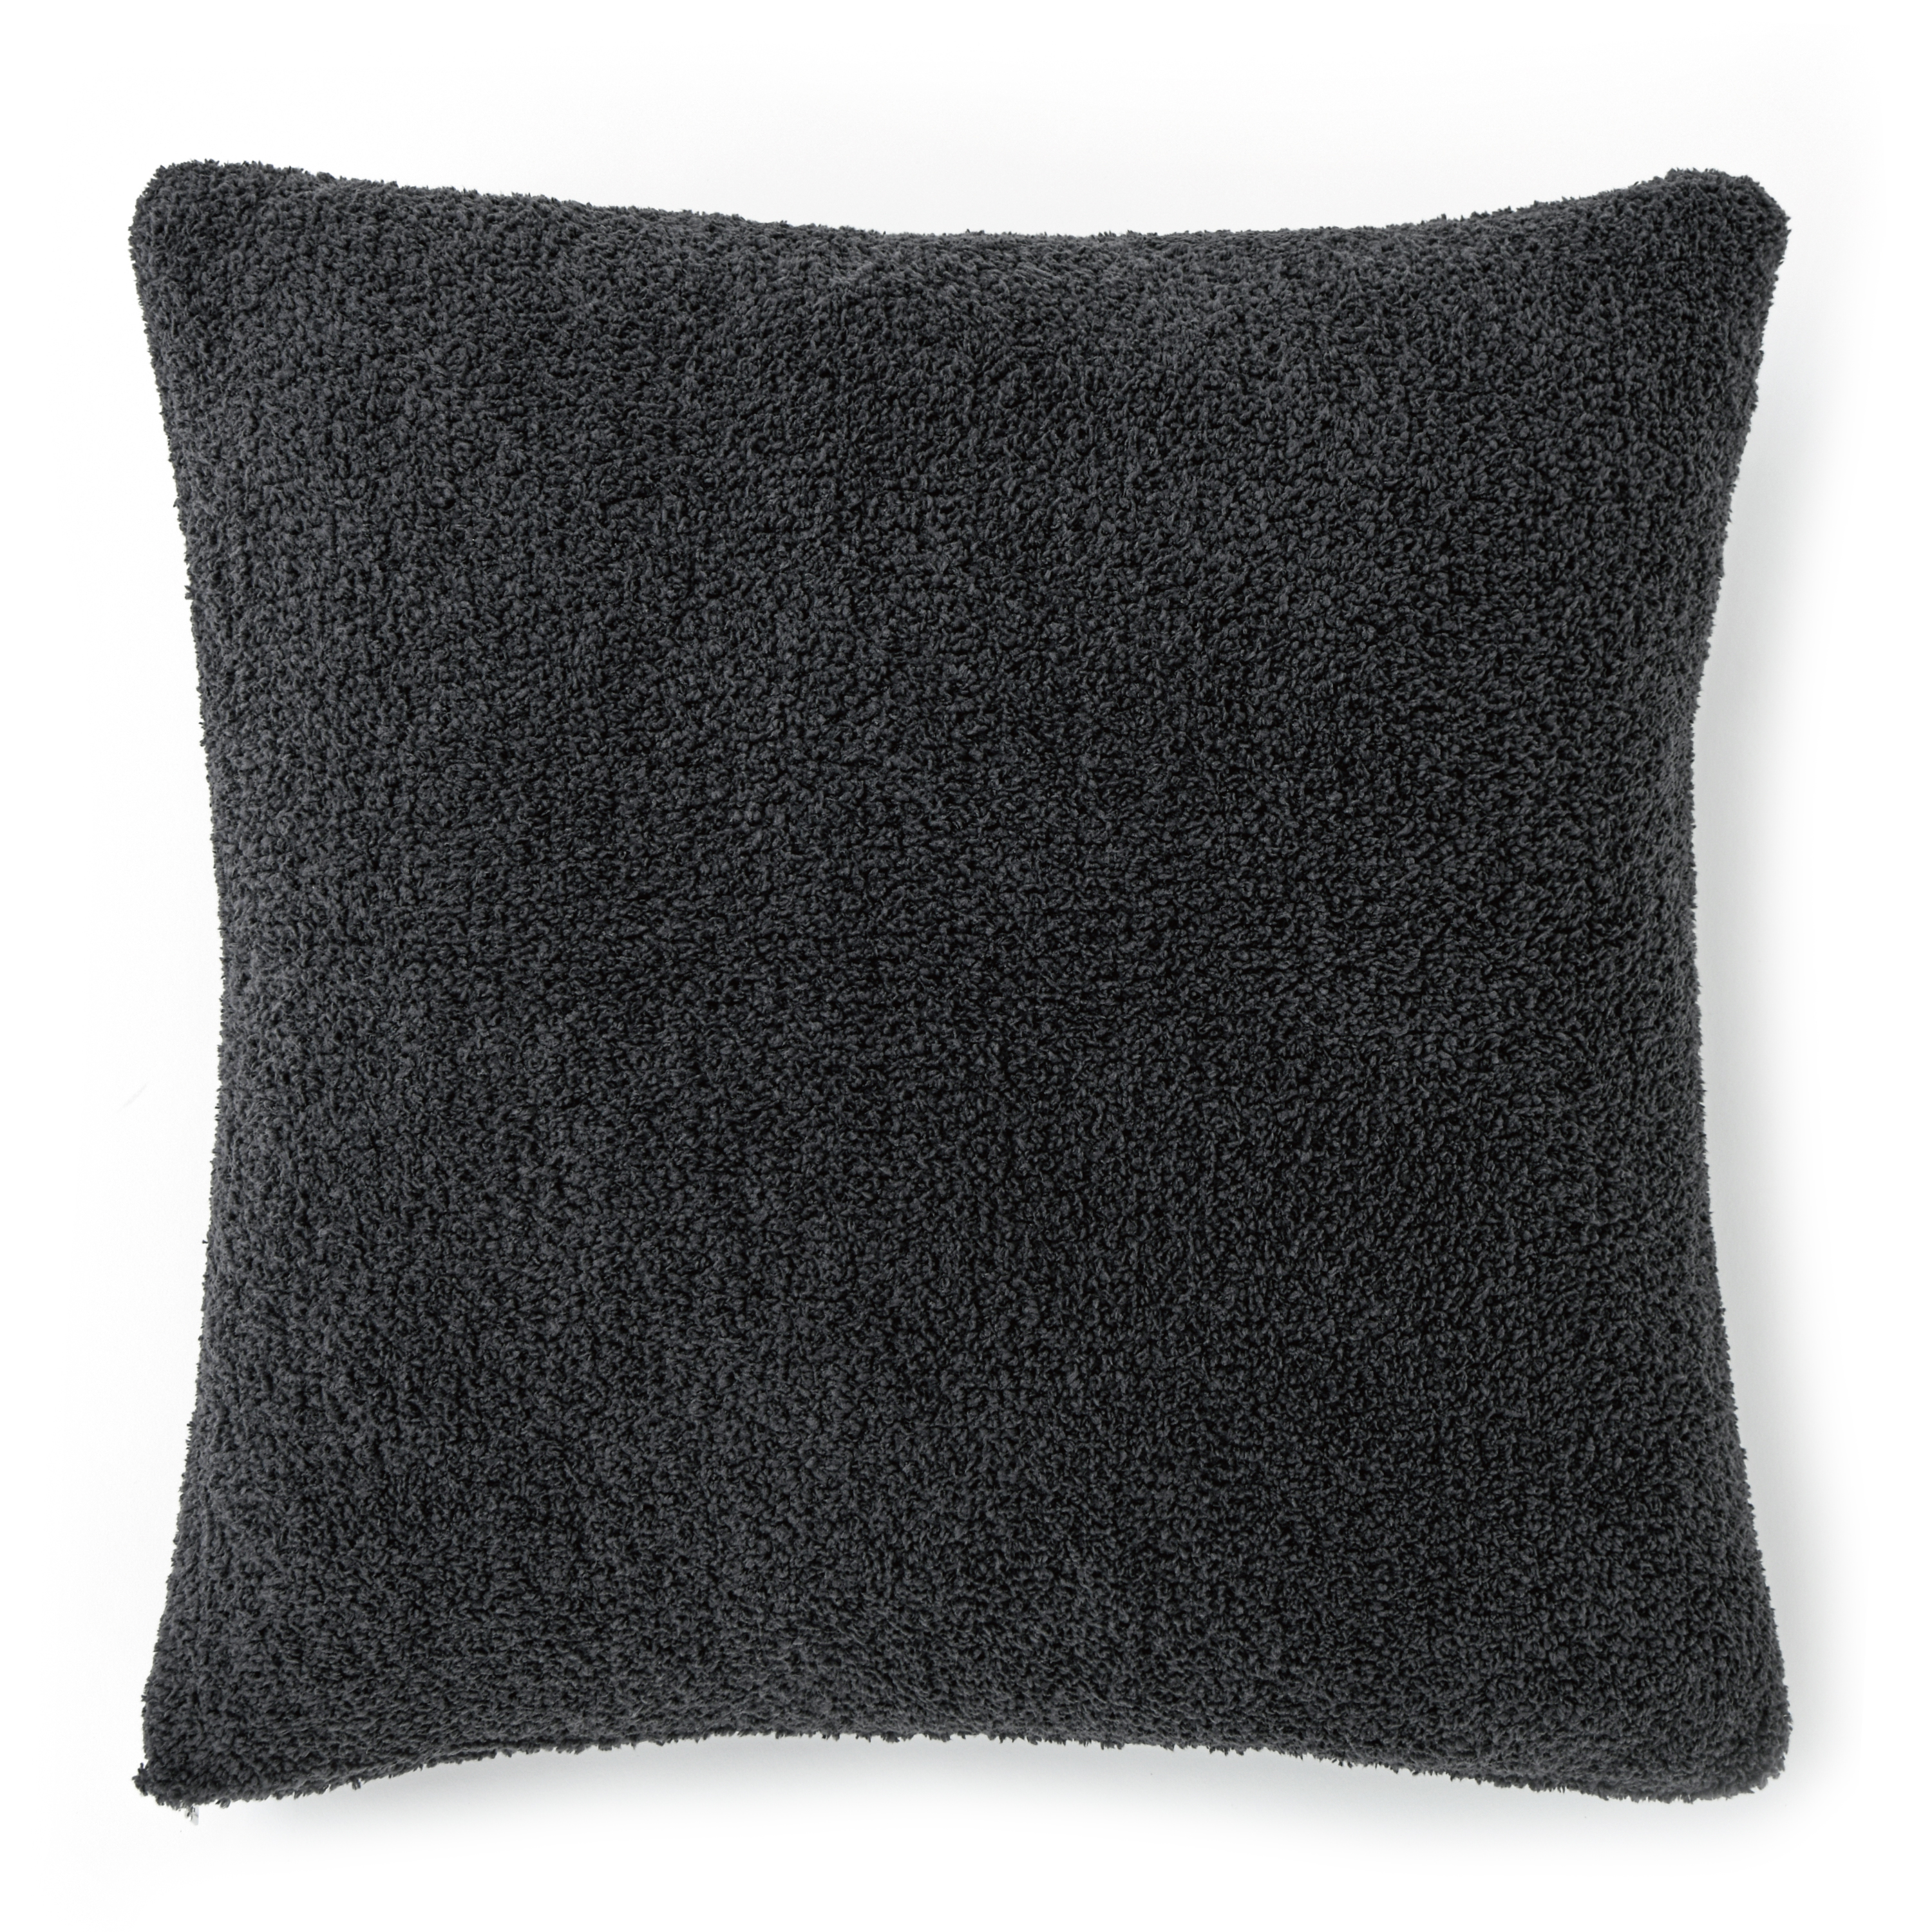 BIG CUSHION COVER / SOLID